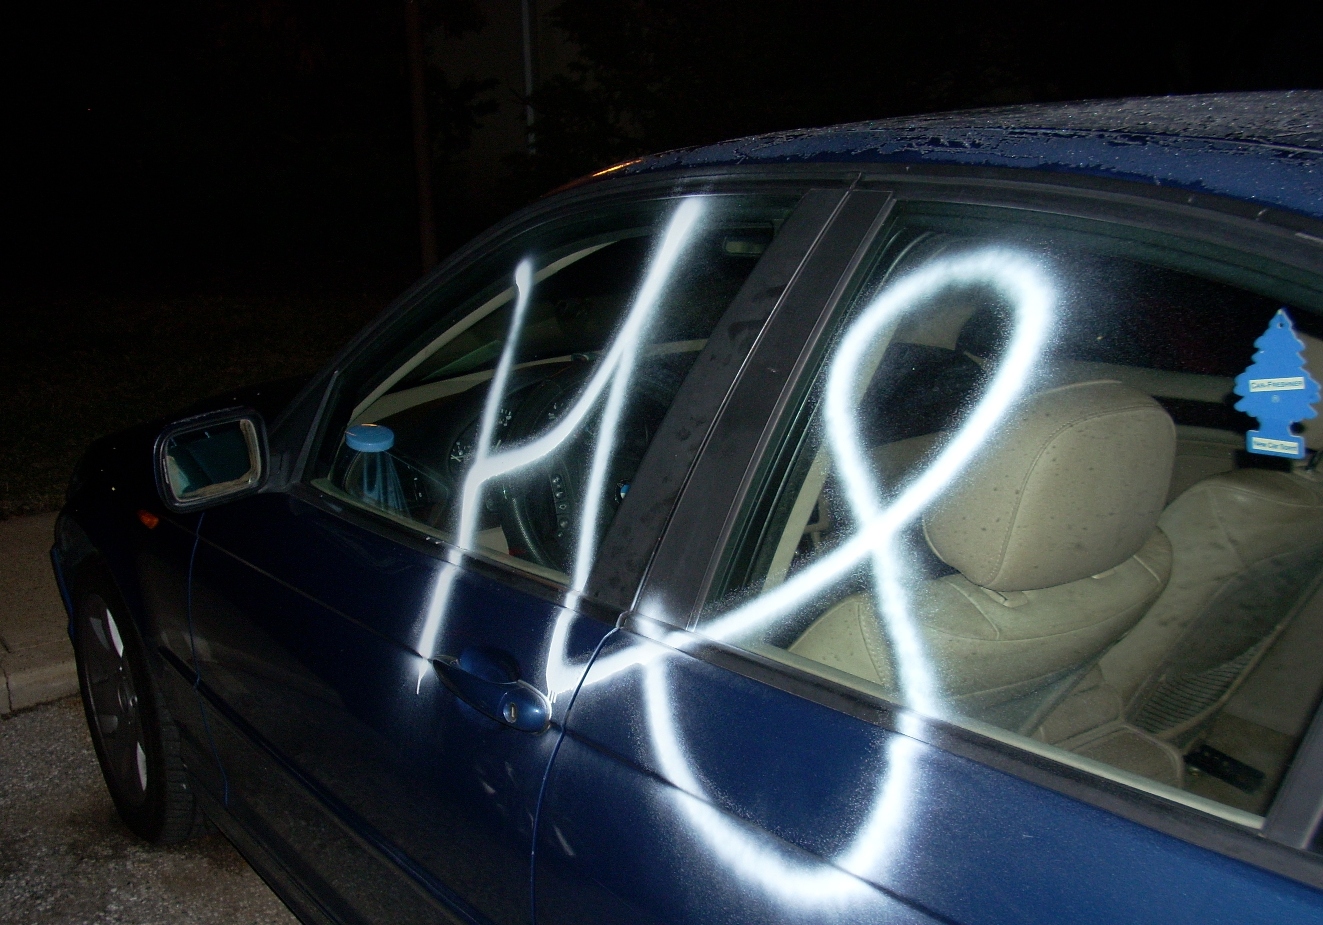 More than 150 cars spray-painted in Columbia